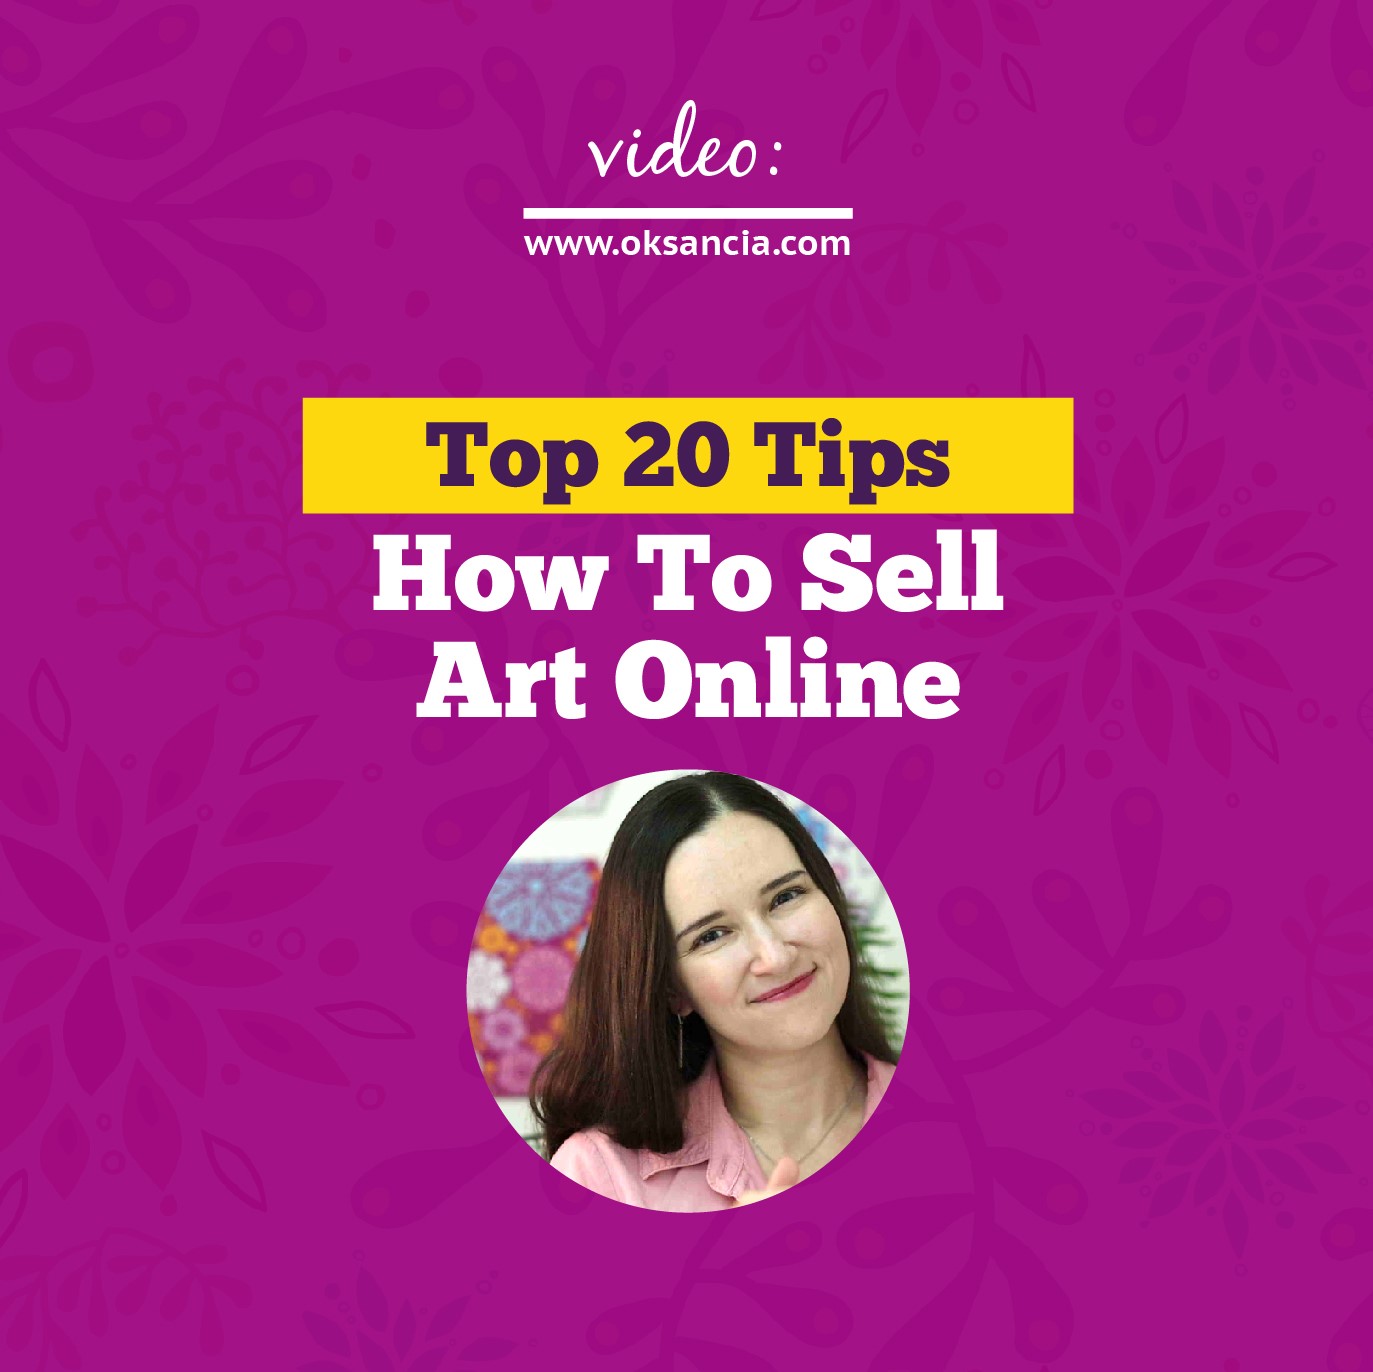 How to sell art online: Top 20 tips